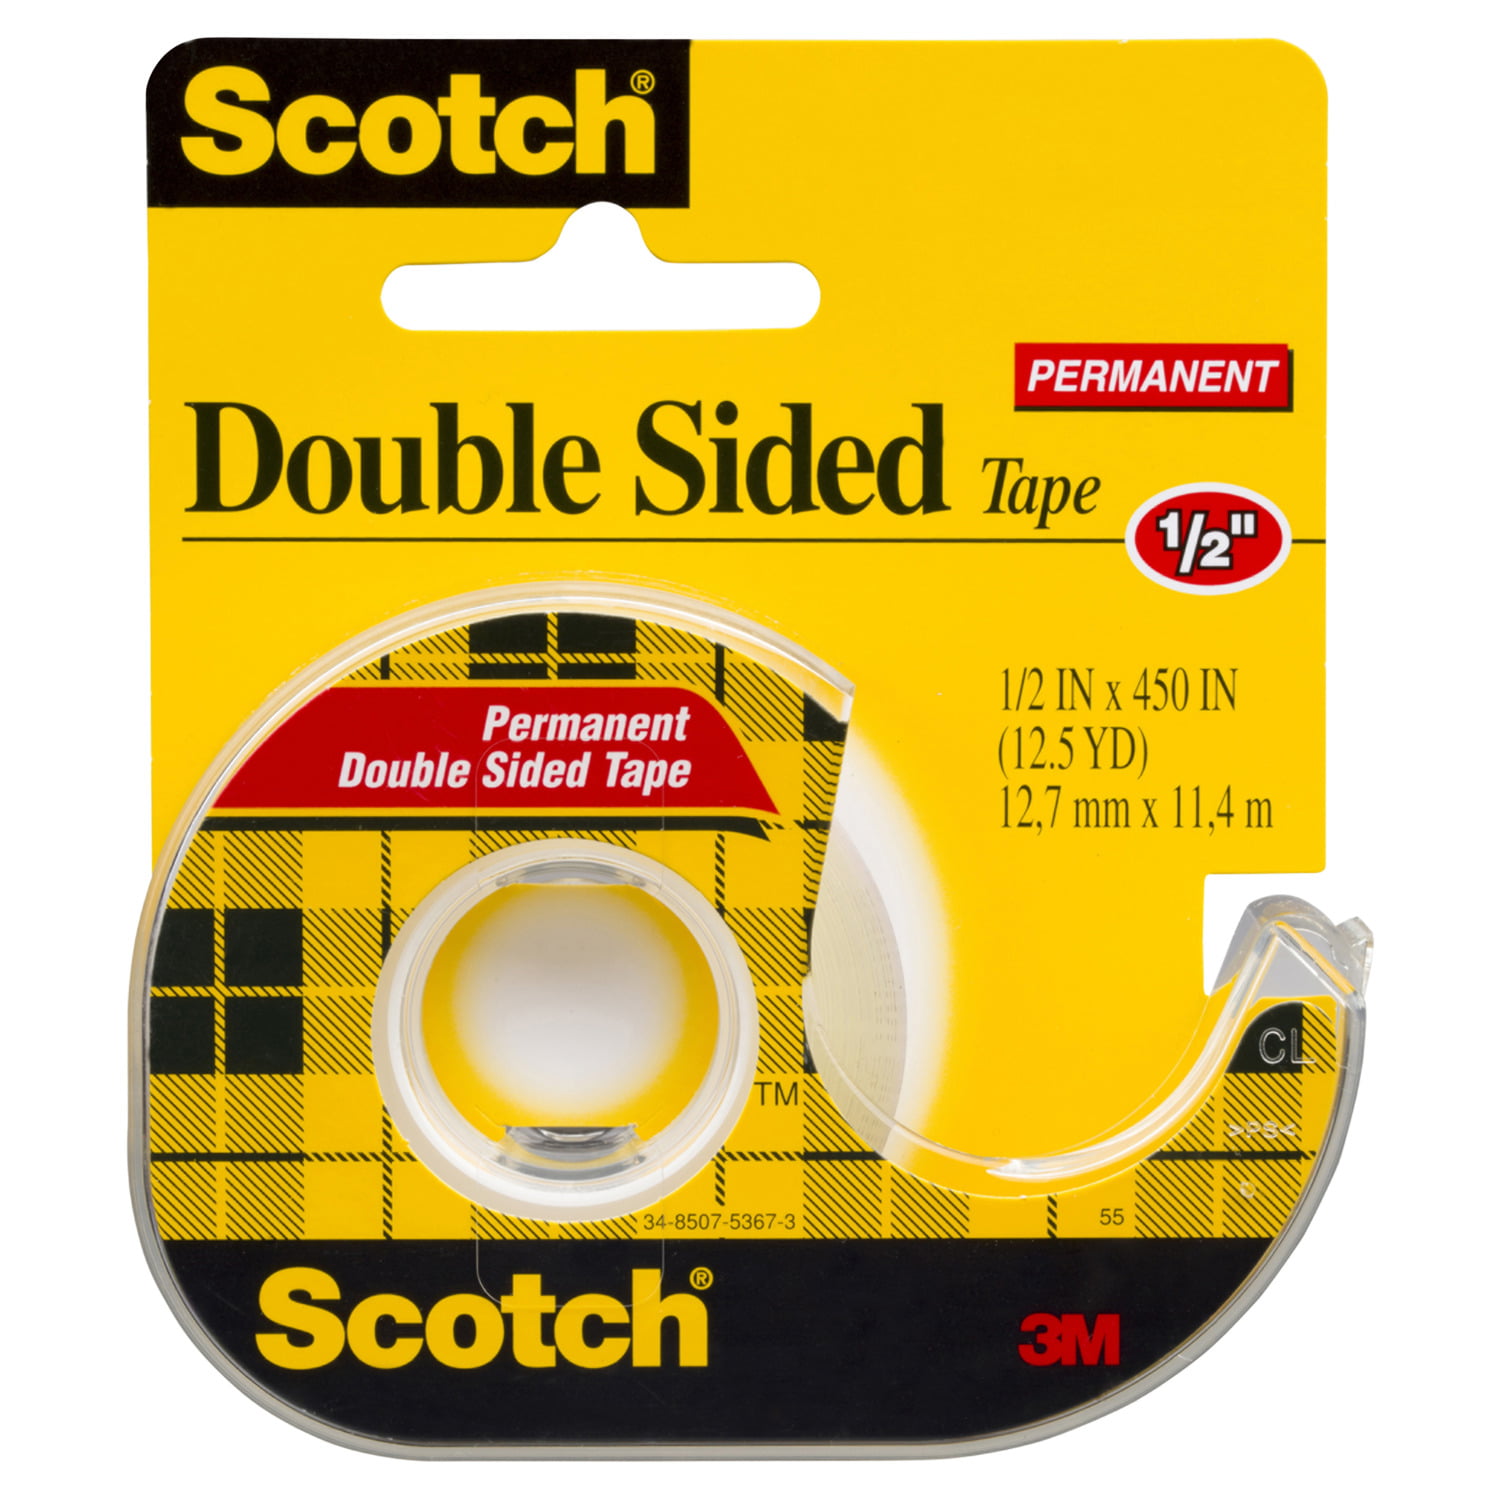 Scotch 665 Double-Sided Permanent Tape in Handheld Dispenser 1/2" x 250" Clear 